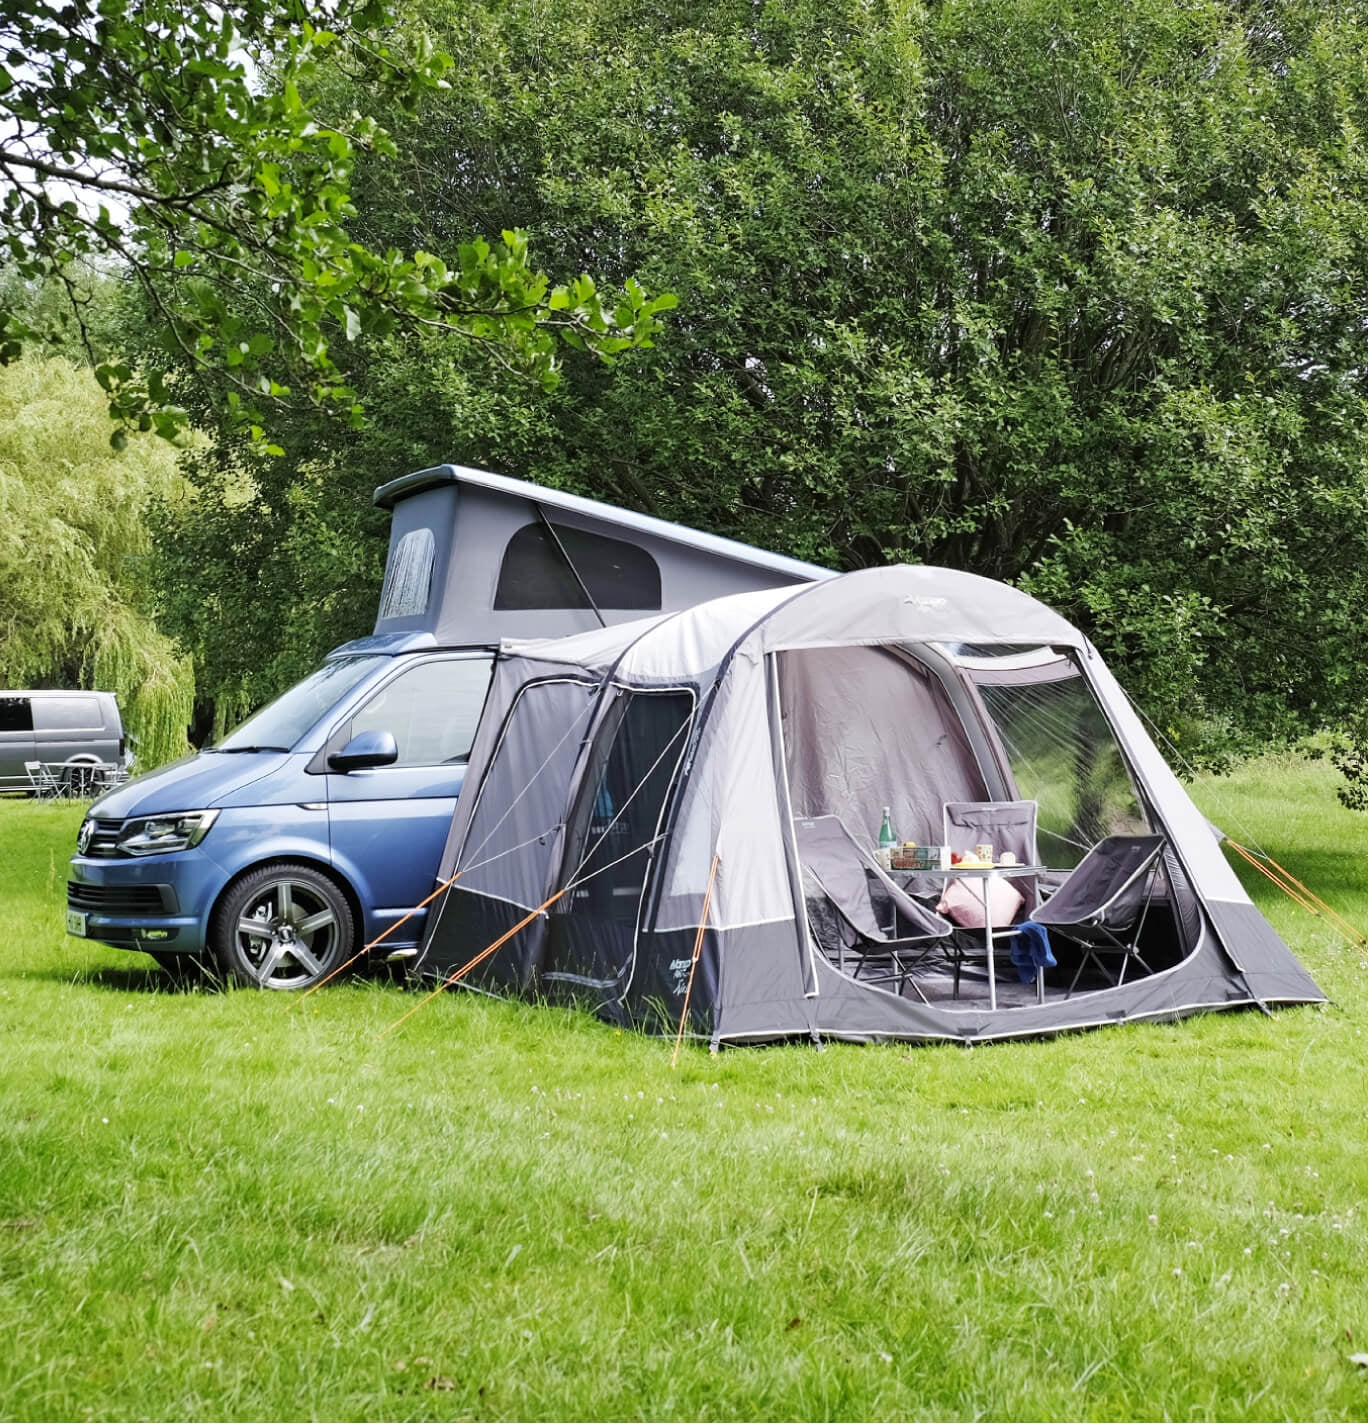 Vango Kela pitched to a VW with camping furniture set up